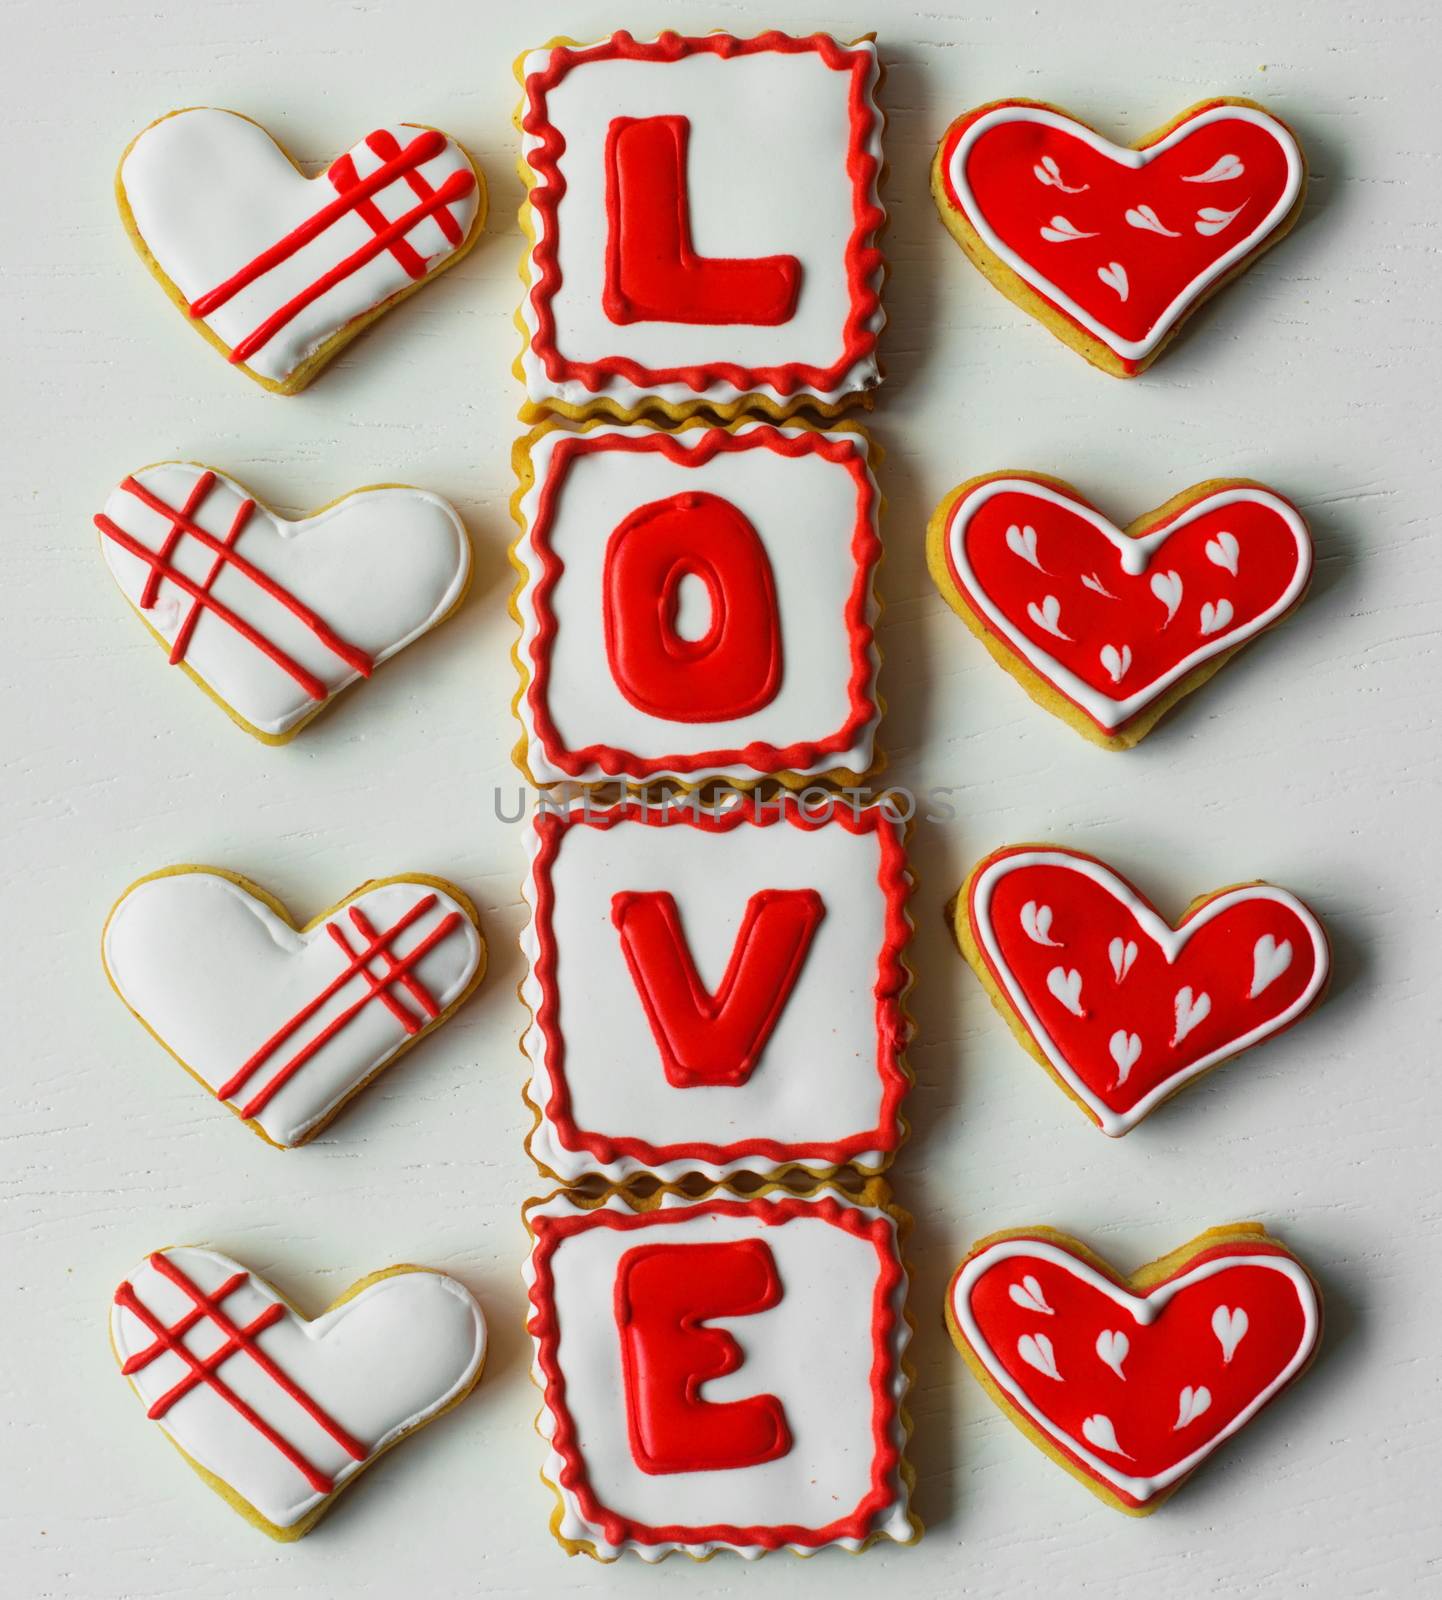 Cookies made for Valentine's Day.for couples in love. delicious love cookies. lovers cook